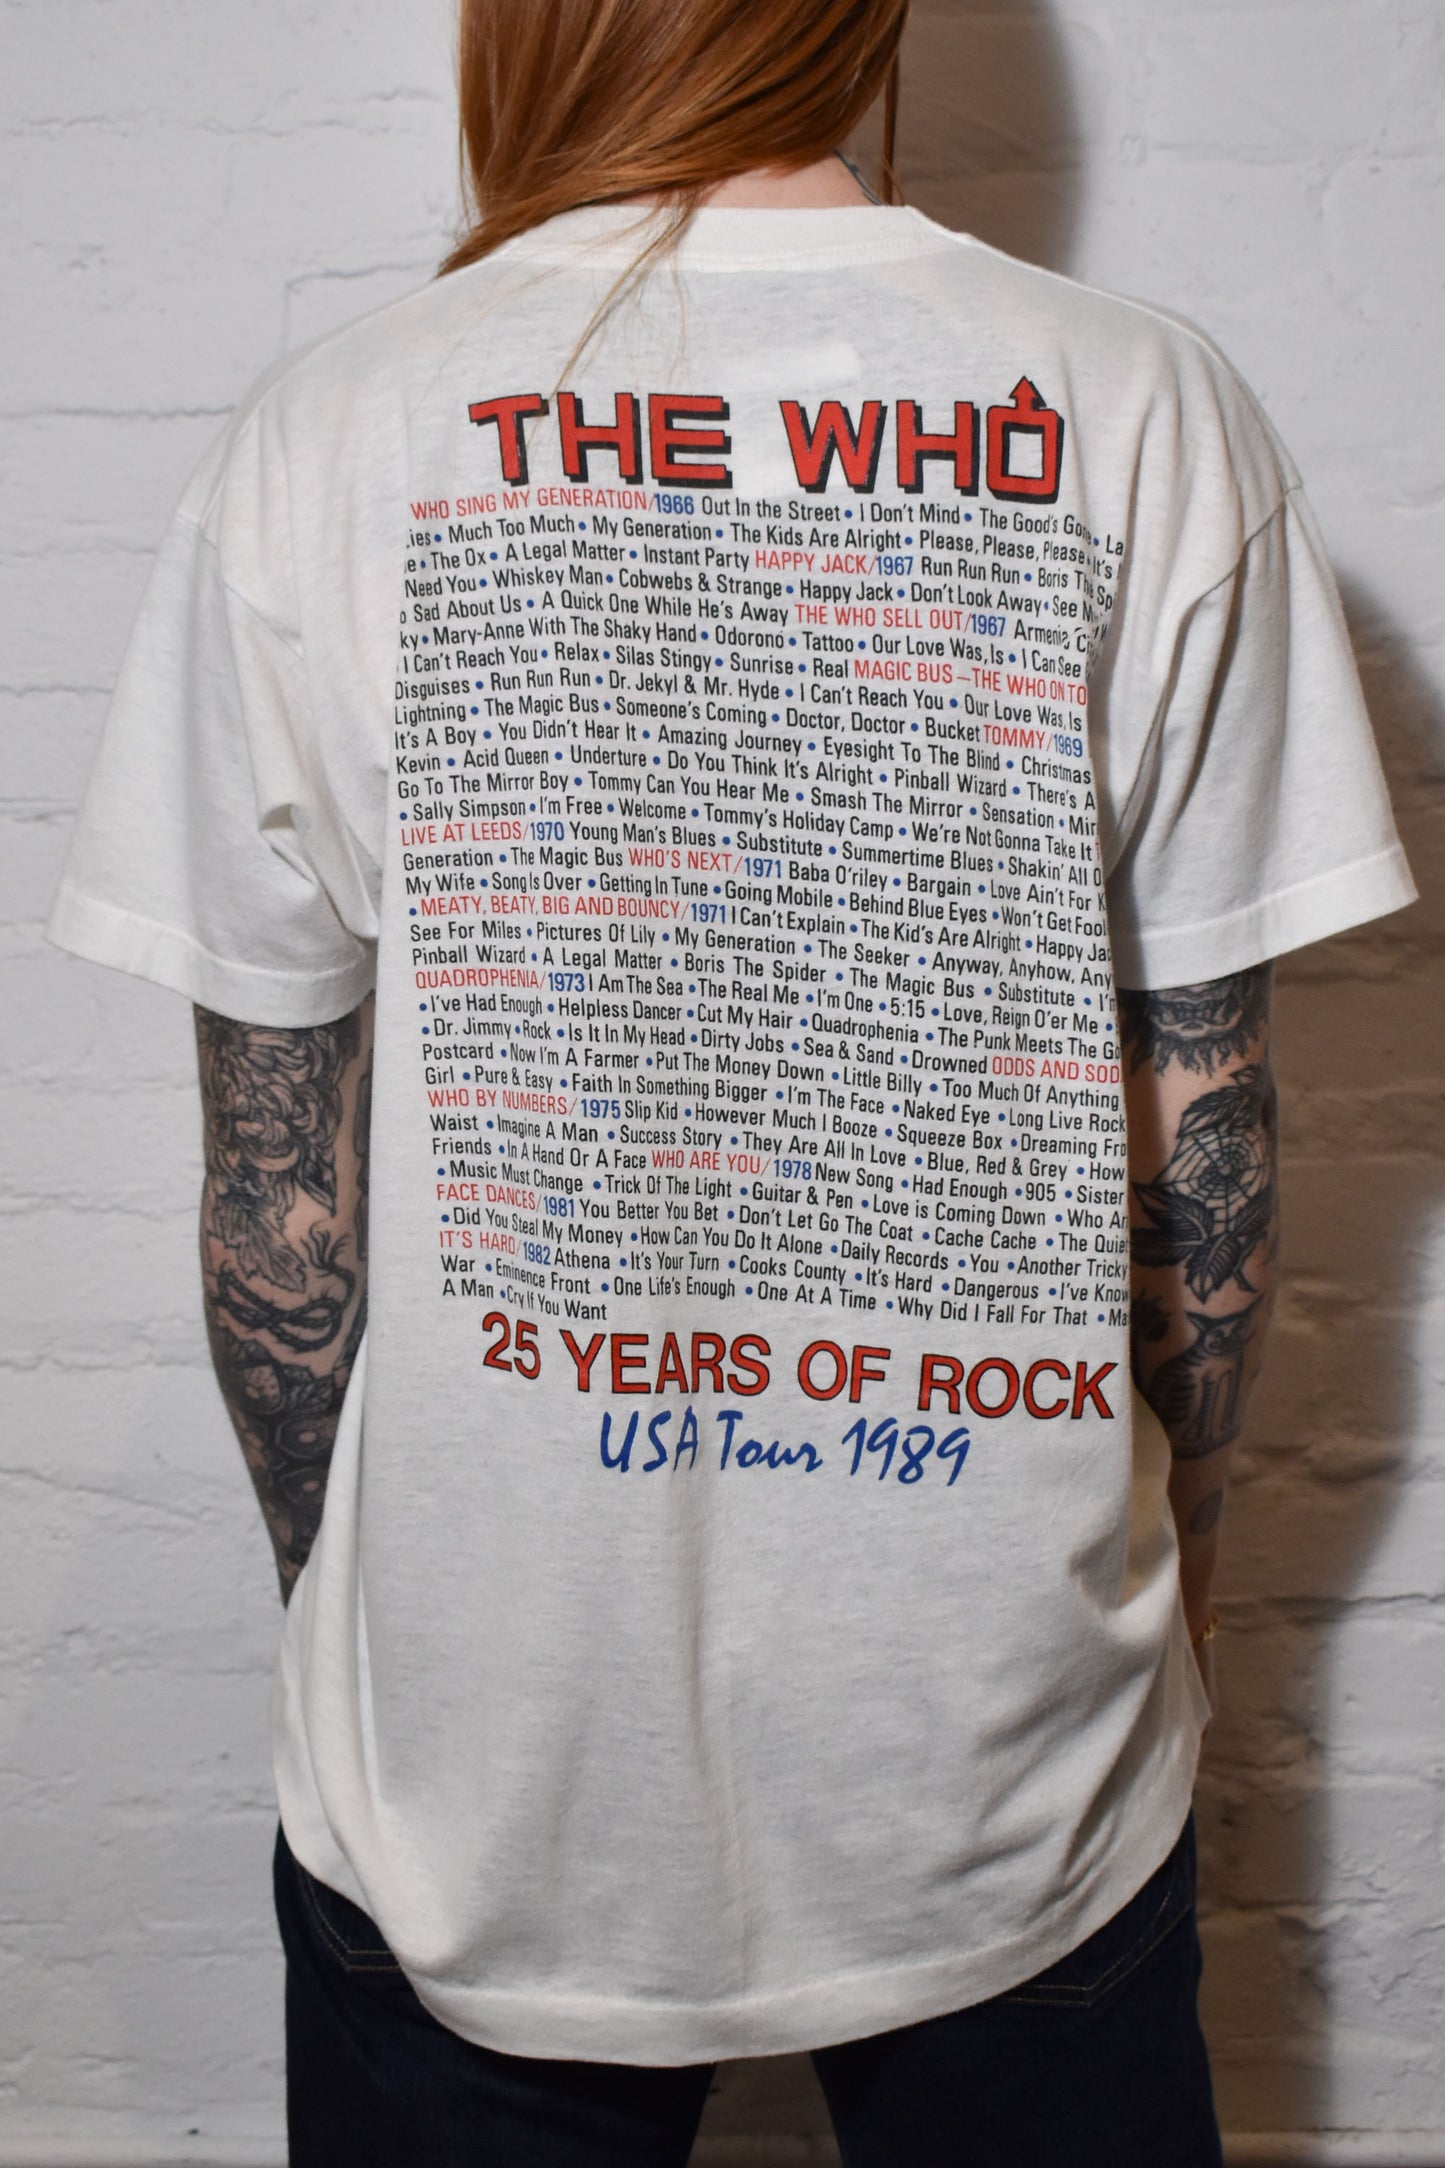 Vintage 1989 "The Who" The Kids Are Alright Tour T-shirt